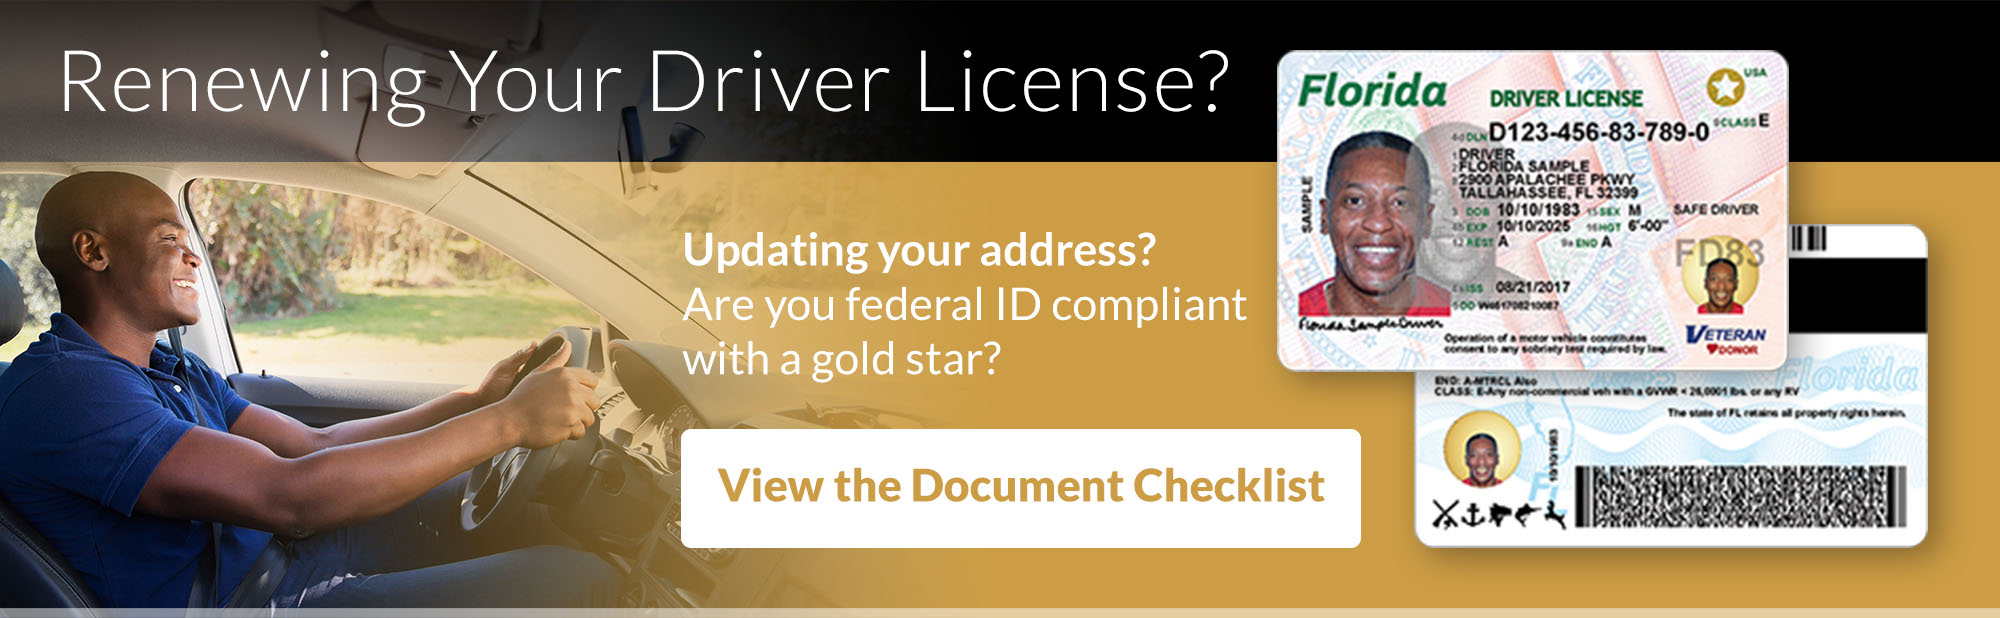 Renewing Your Driver License? Updating your address? Are you federal ID complian with a gold star? View the Document Checklist by clicking here.